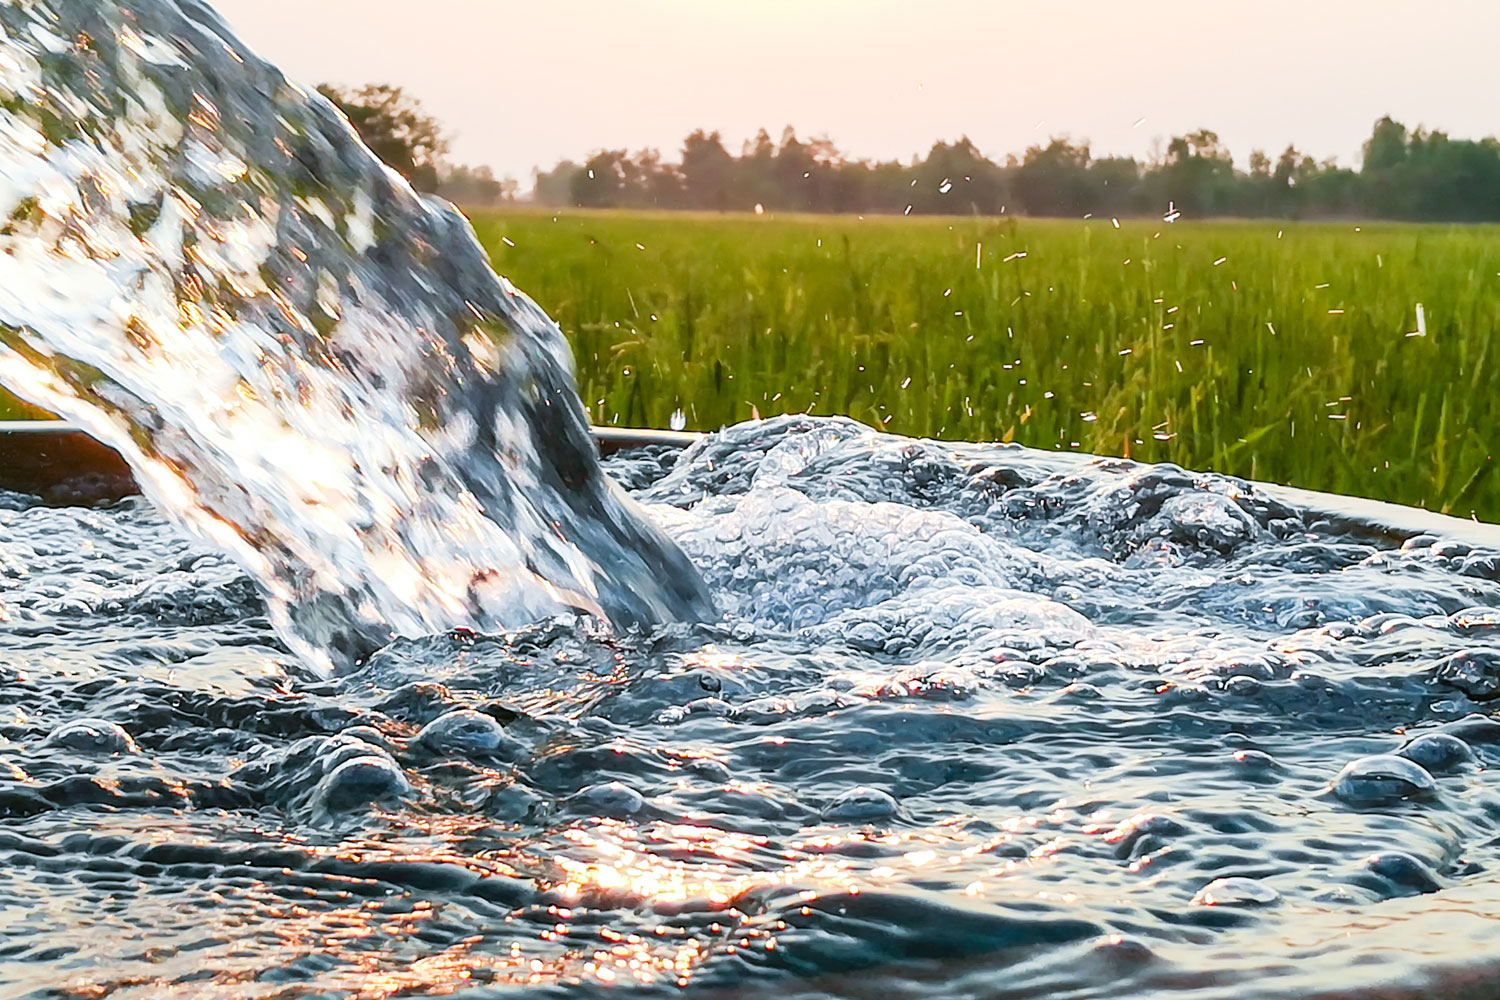 Groundwater Pumping Can Increase Arsenic Levels in Irrigation and Drinking Water